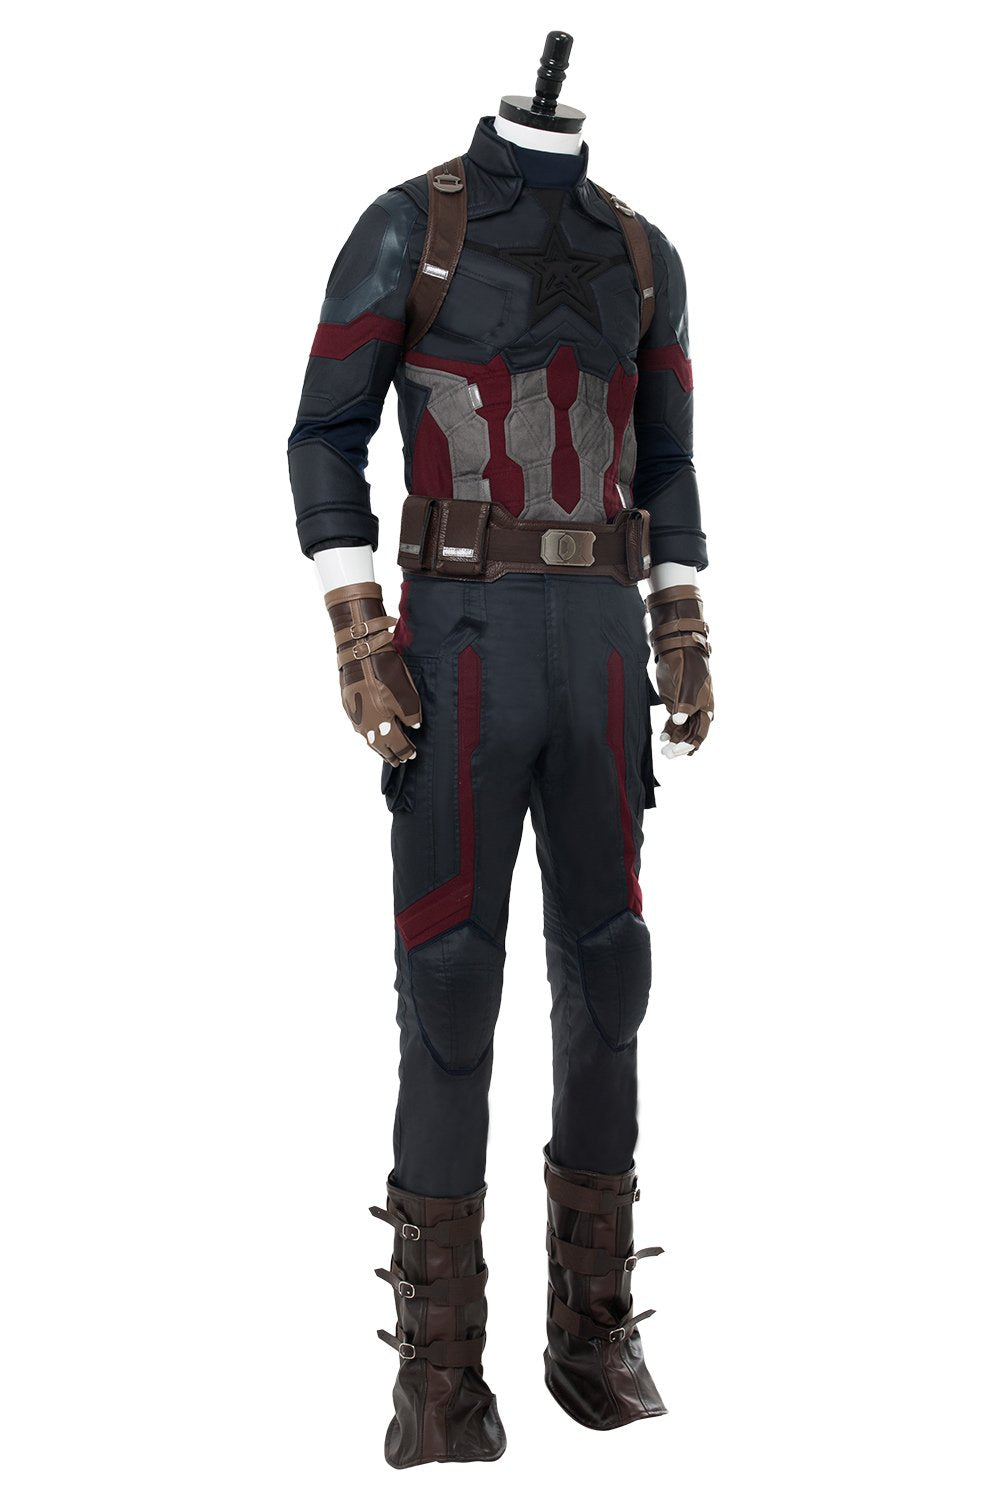 Avengers 3 : Infinity War Captain America Steven Rogers Outfit Uniform Suit Cosplay Costume NEW